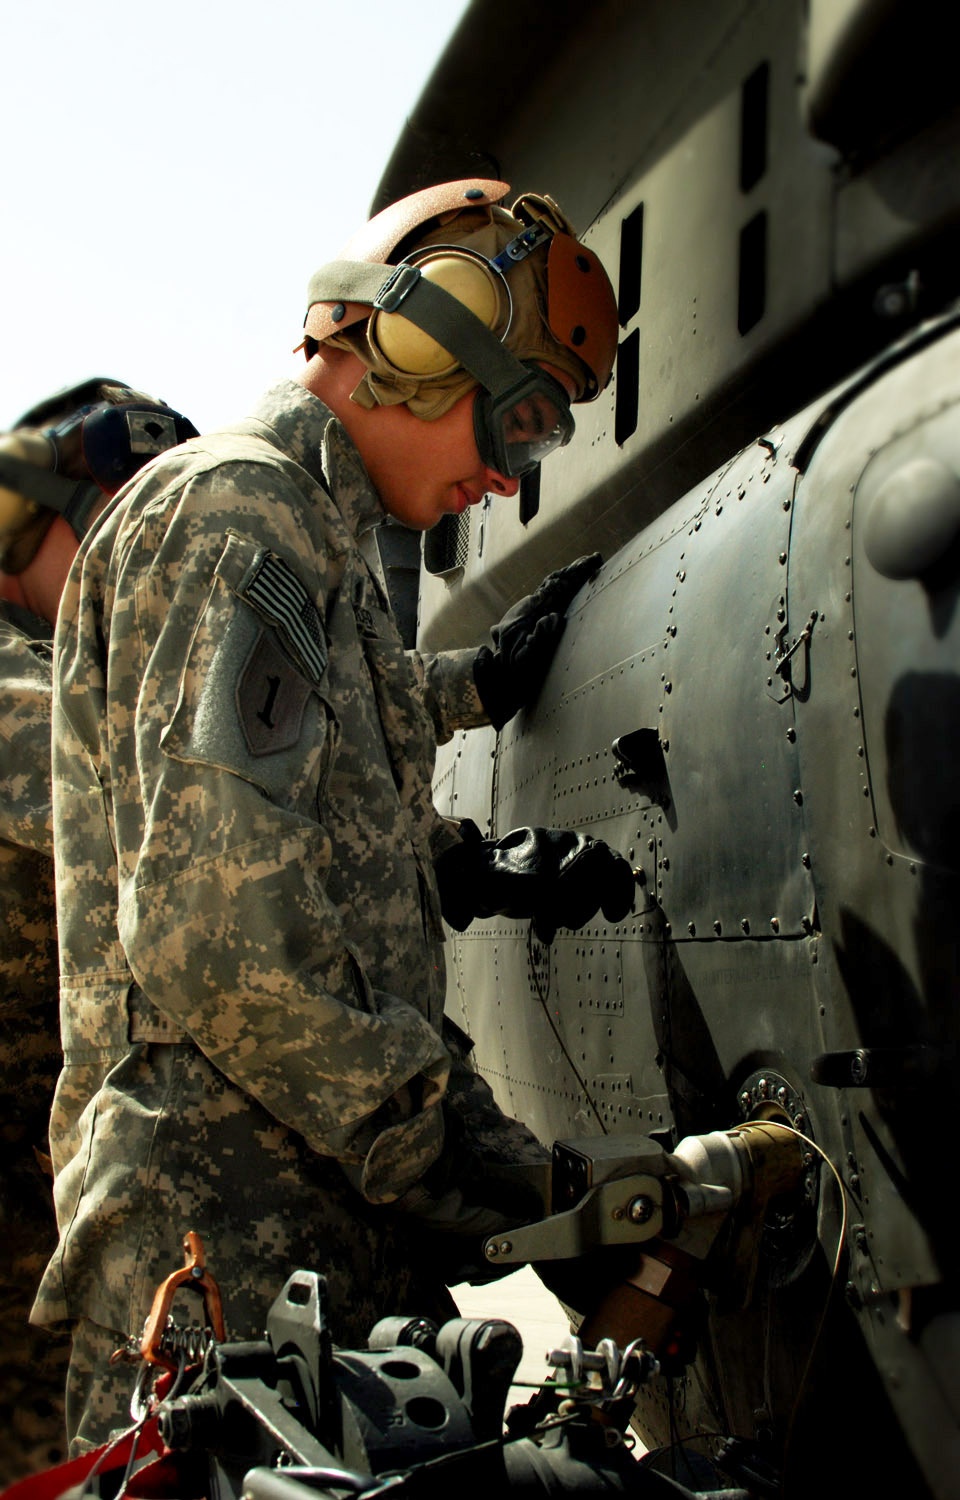 Army fuelers pump over 5 million gallons of jet fuel in Iraq